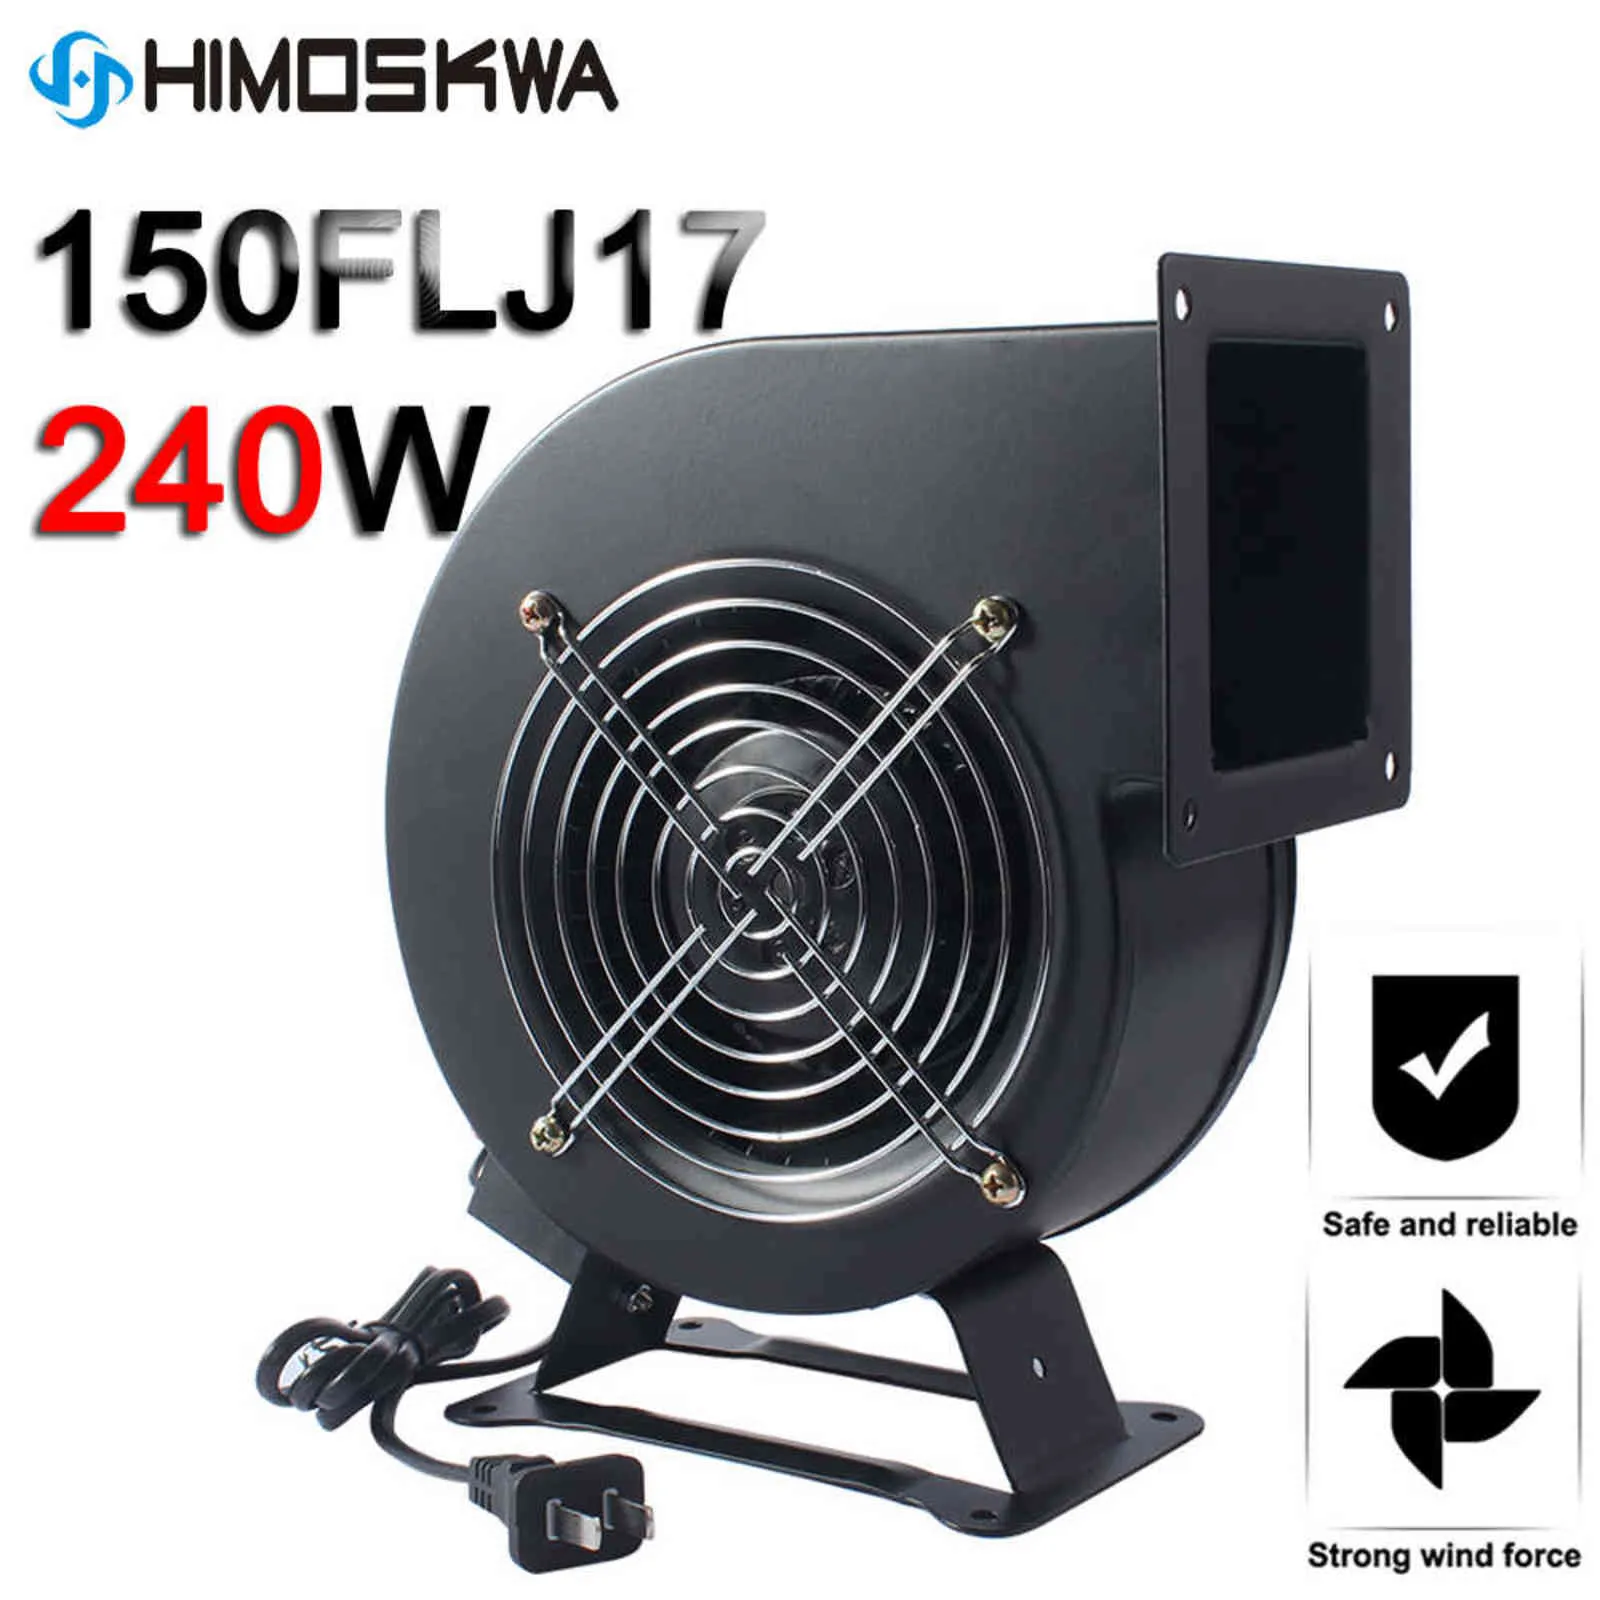 240W Small dust exhaust electric blower power frequency centrifugal fan 150FLJ17 all copper wire blower 220V 380V 110V